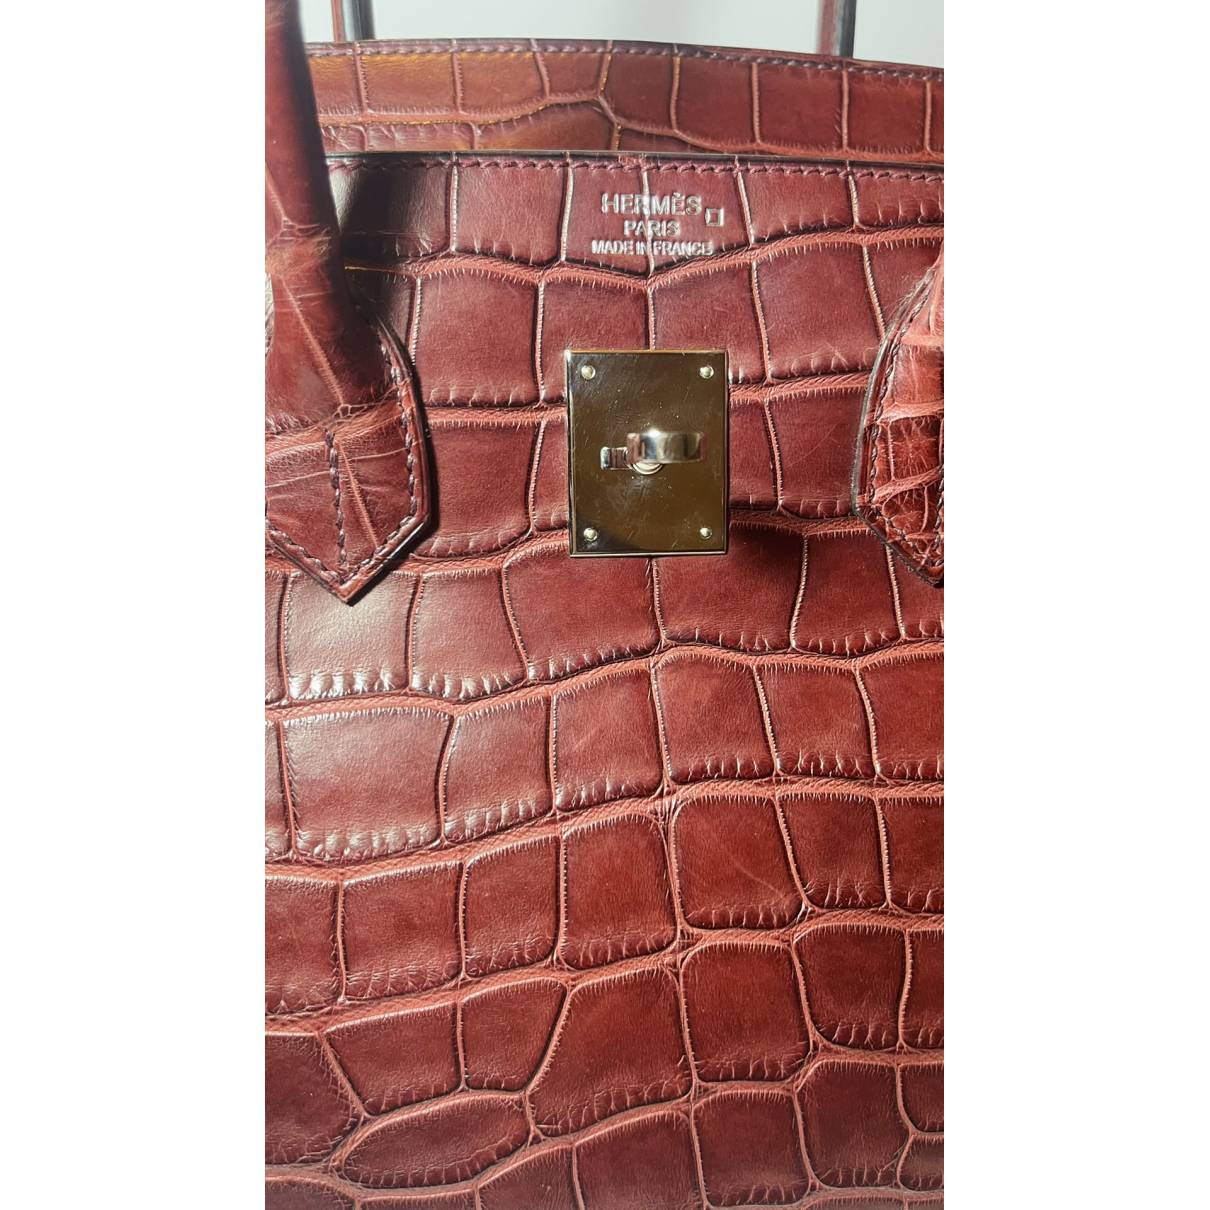 How to Spot Hermes Exotic Bags (1)- About Alligator Bag : r